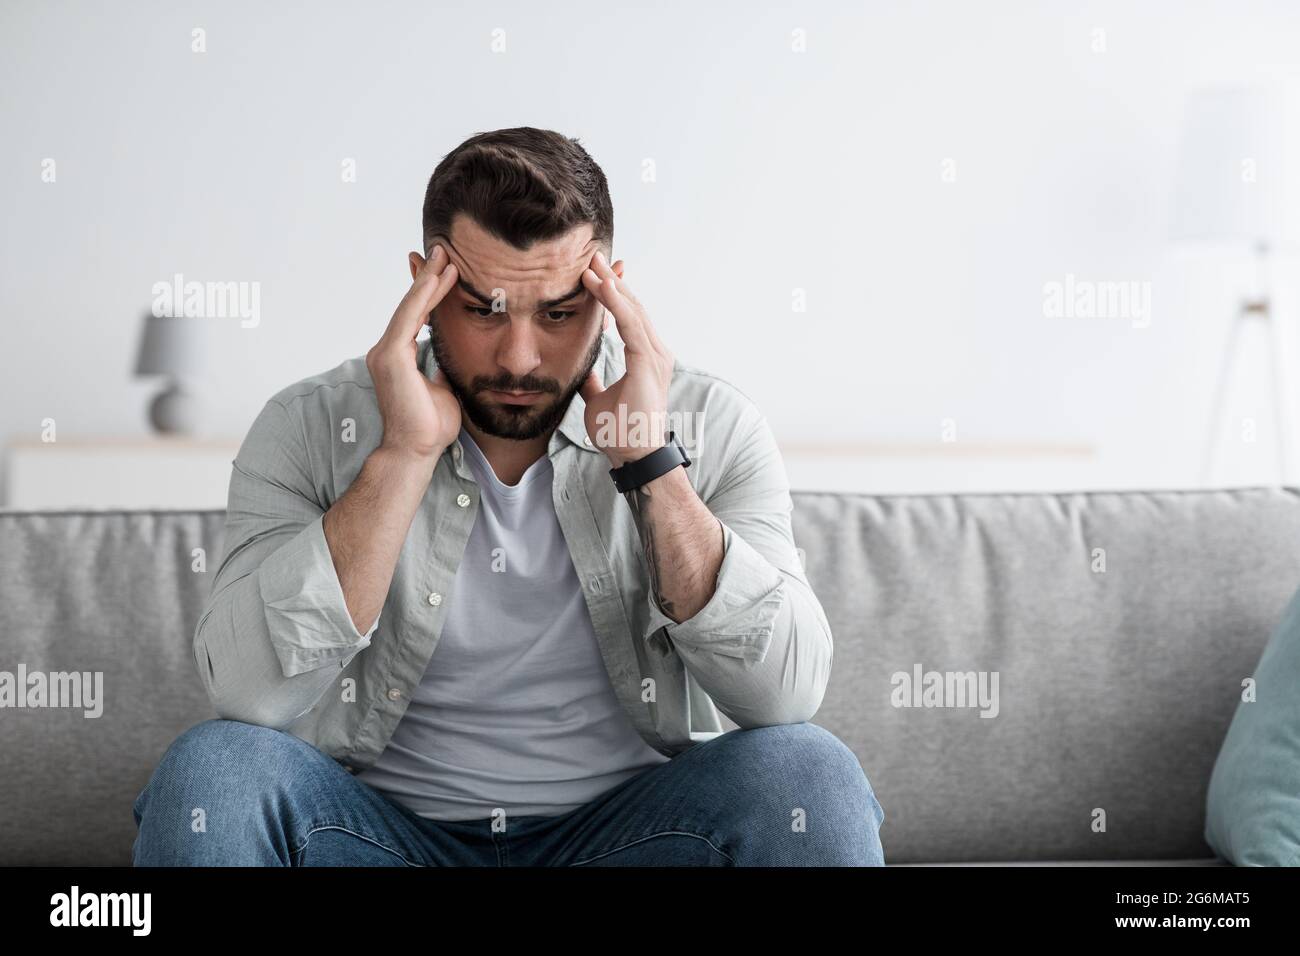 Dramatic lifestyle, migraine, middle age crisis, bad feeling, health problems Stock Photo